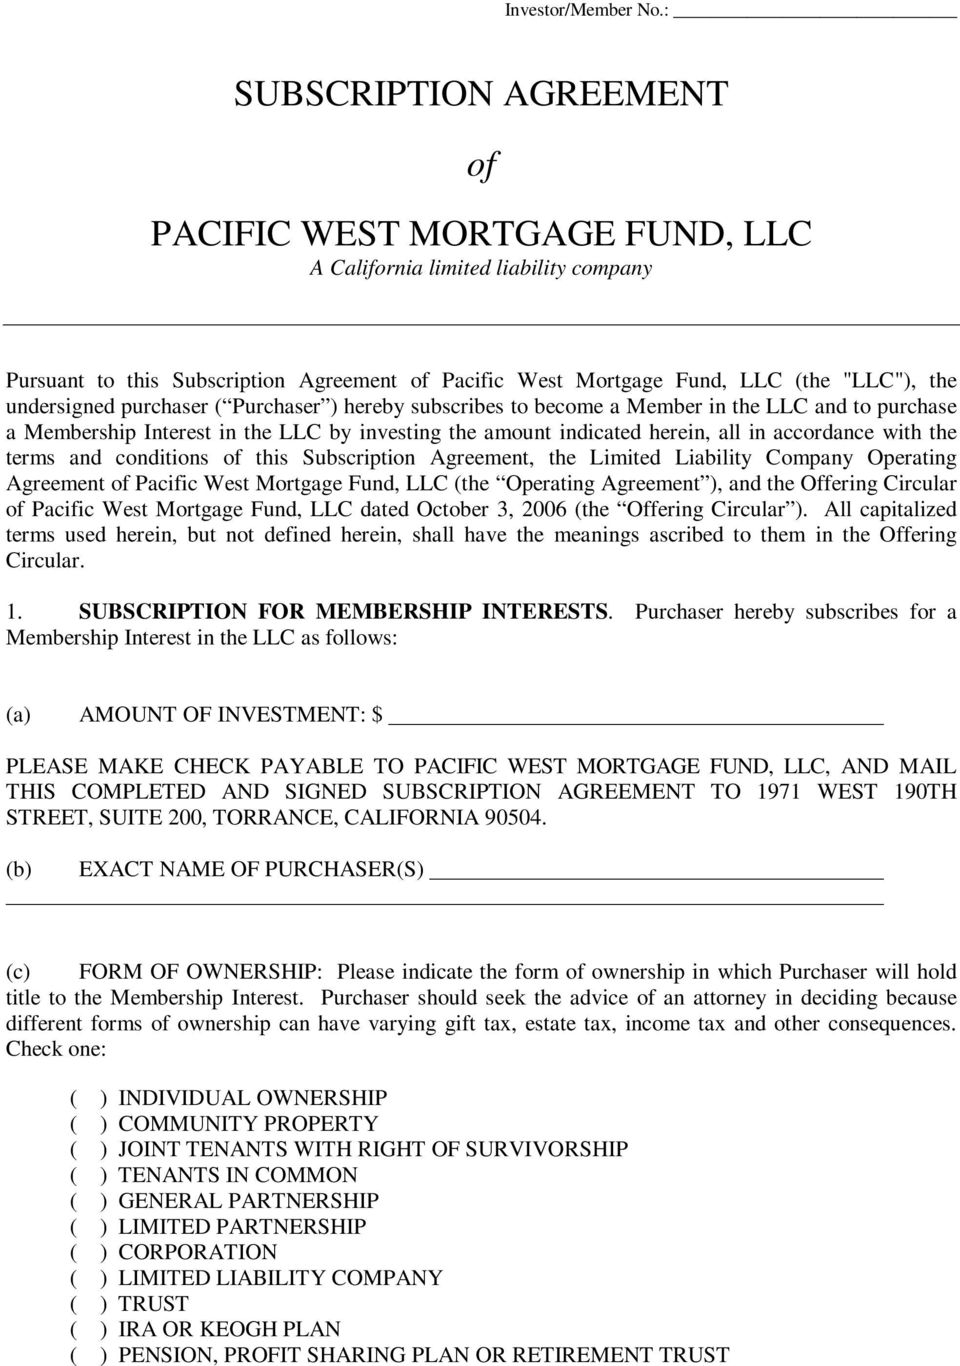 California Llc Operating Agreement Subscription Agreement Of Pacific West Mortgage Fund Llc A